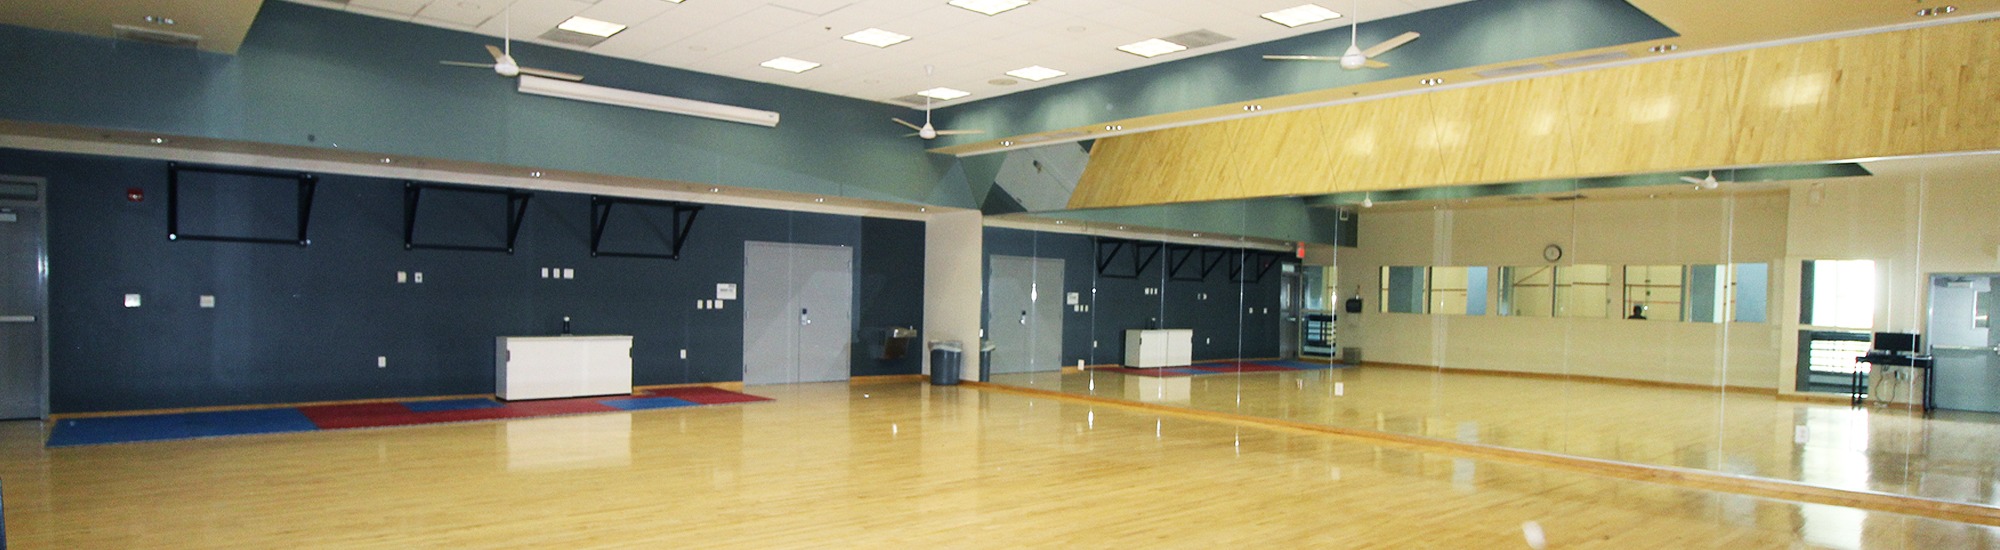 Multipurpose studio with wood floors and mirrors covering the walls